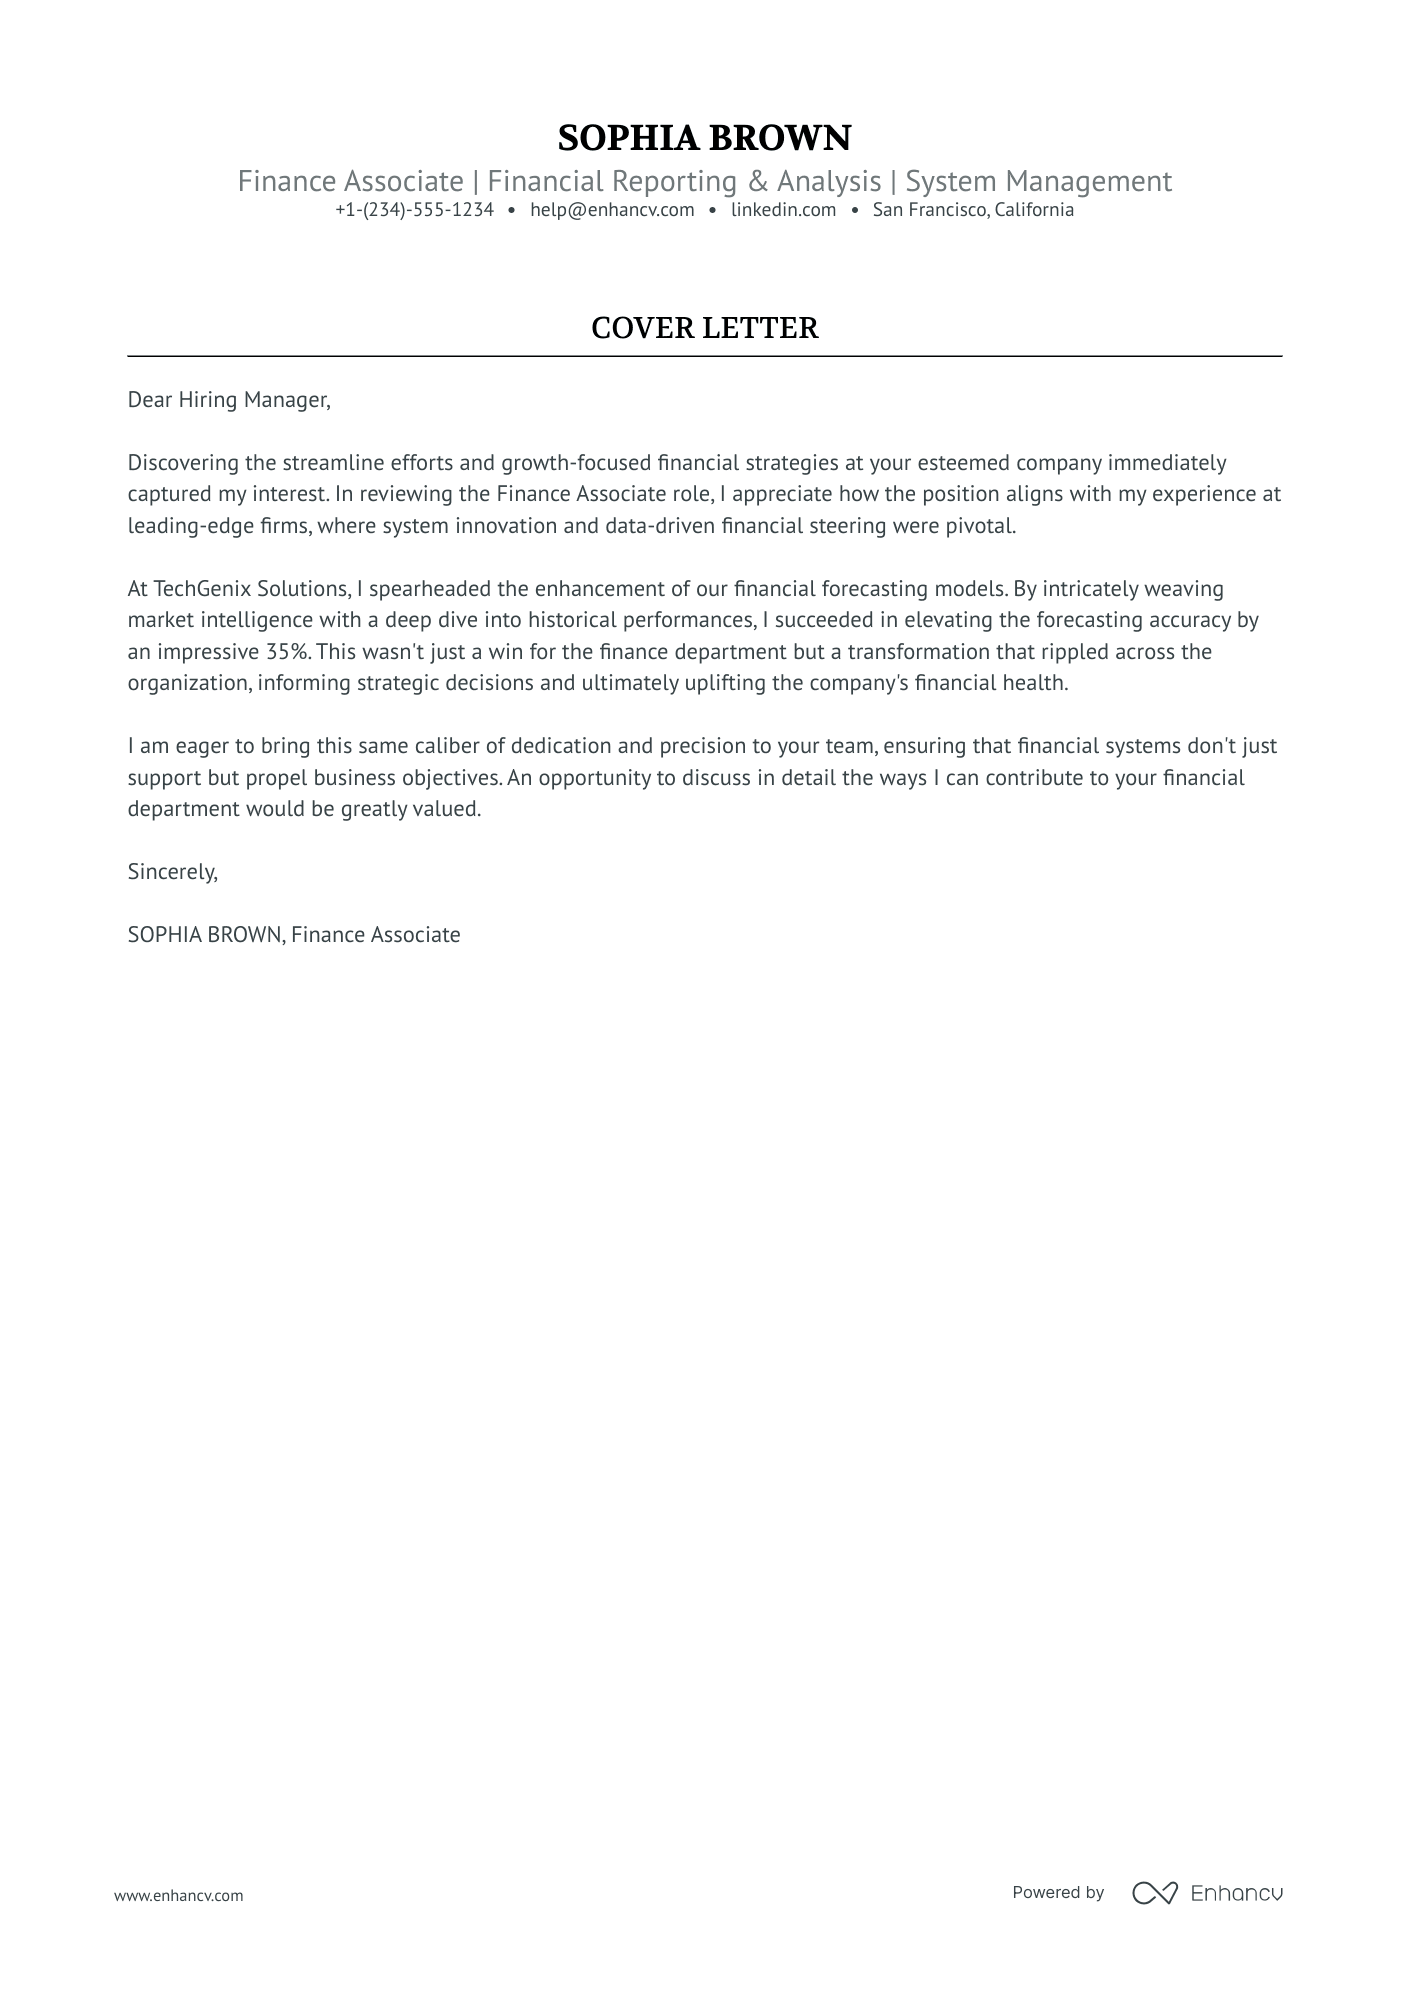 cover letter for finance position with experience